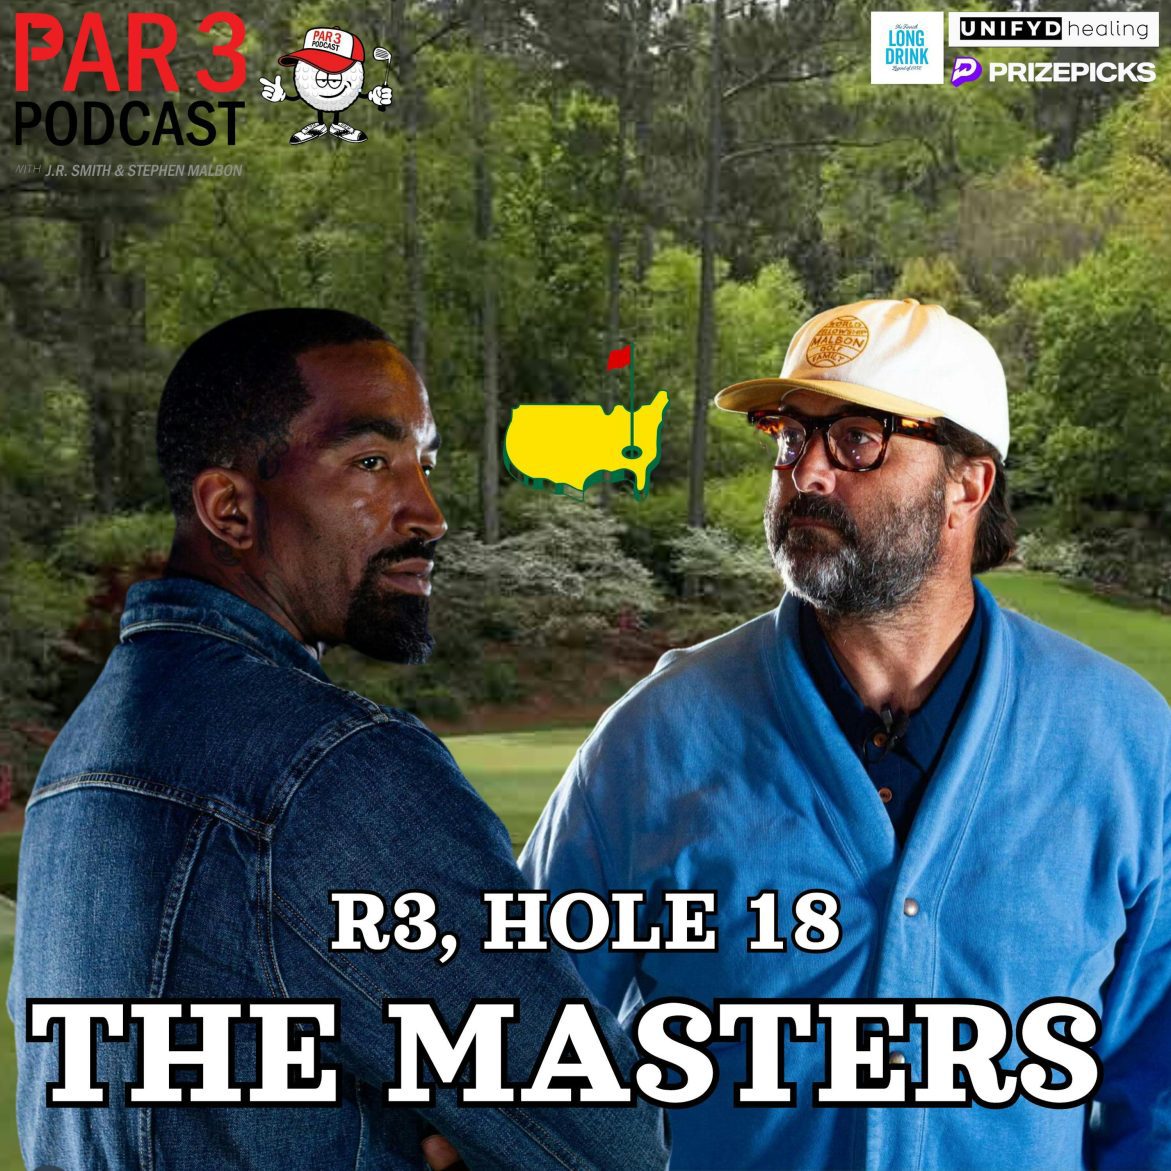 Black Podcasting - R3, HOLE 18: J.R. Smith & Stephen Malbon on The Masters & Par 3 Podcast Heading to Augusta, Players To Watch, Their Champions Meal